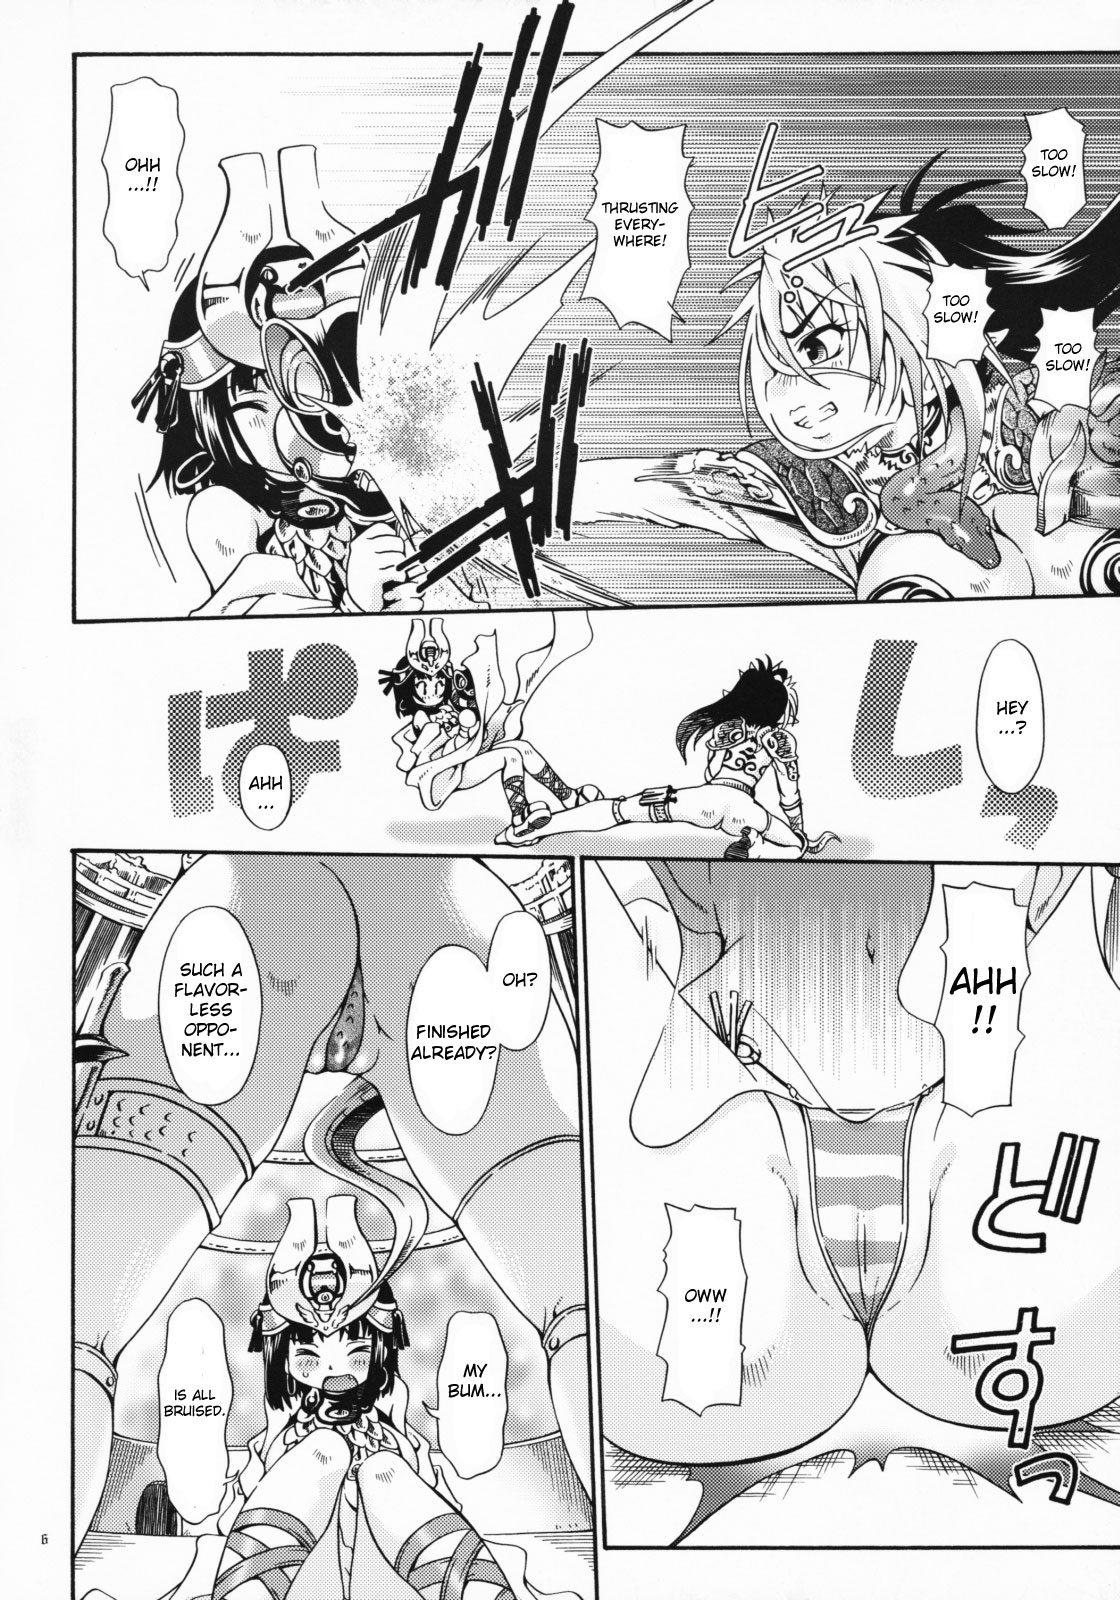 Boy Girl Cat Fight Royal - Queens blade Assfucking - Page 5